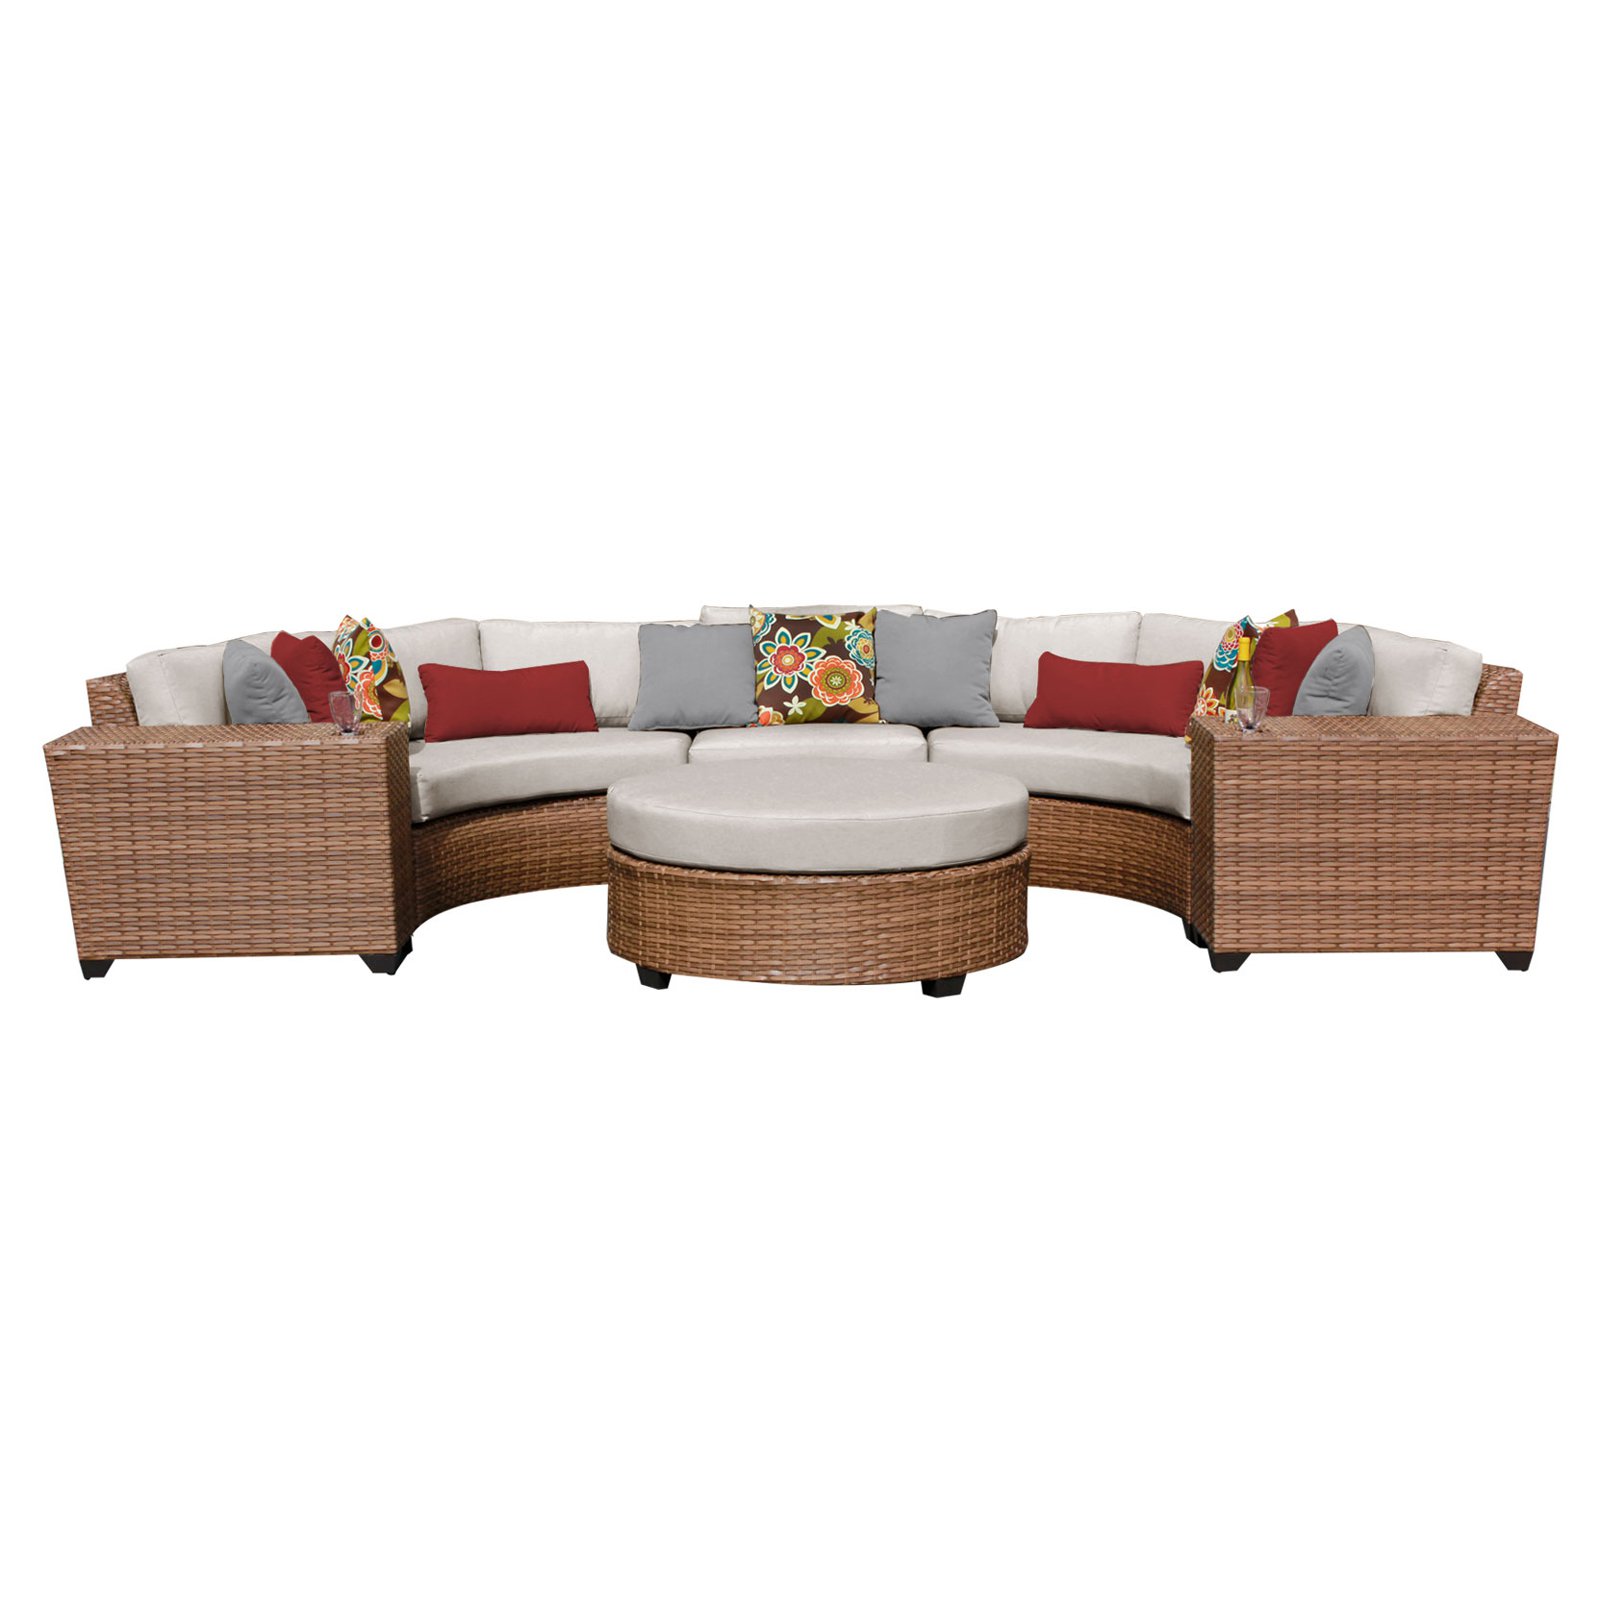 TK Classics Laguna Wicker 6 Piece Patio Conversation Set with Round Coffee Table and 2 Sets of Cushion Covers - image 2 of 3